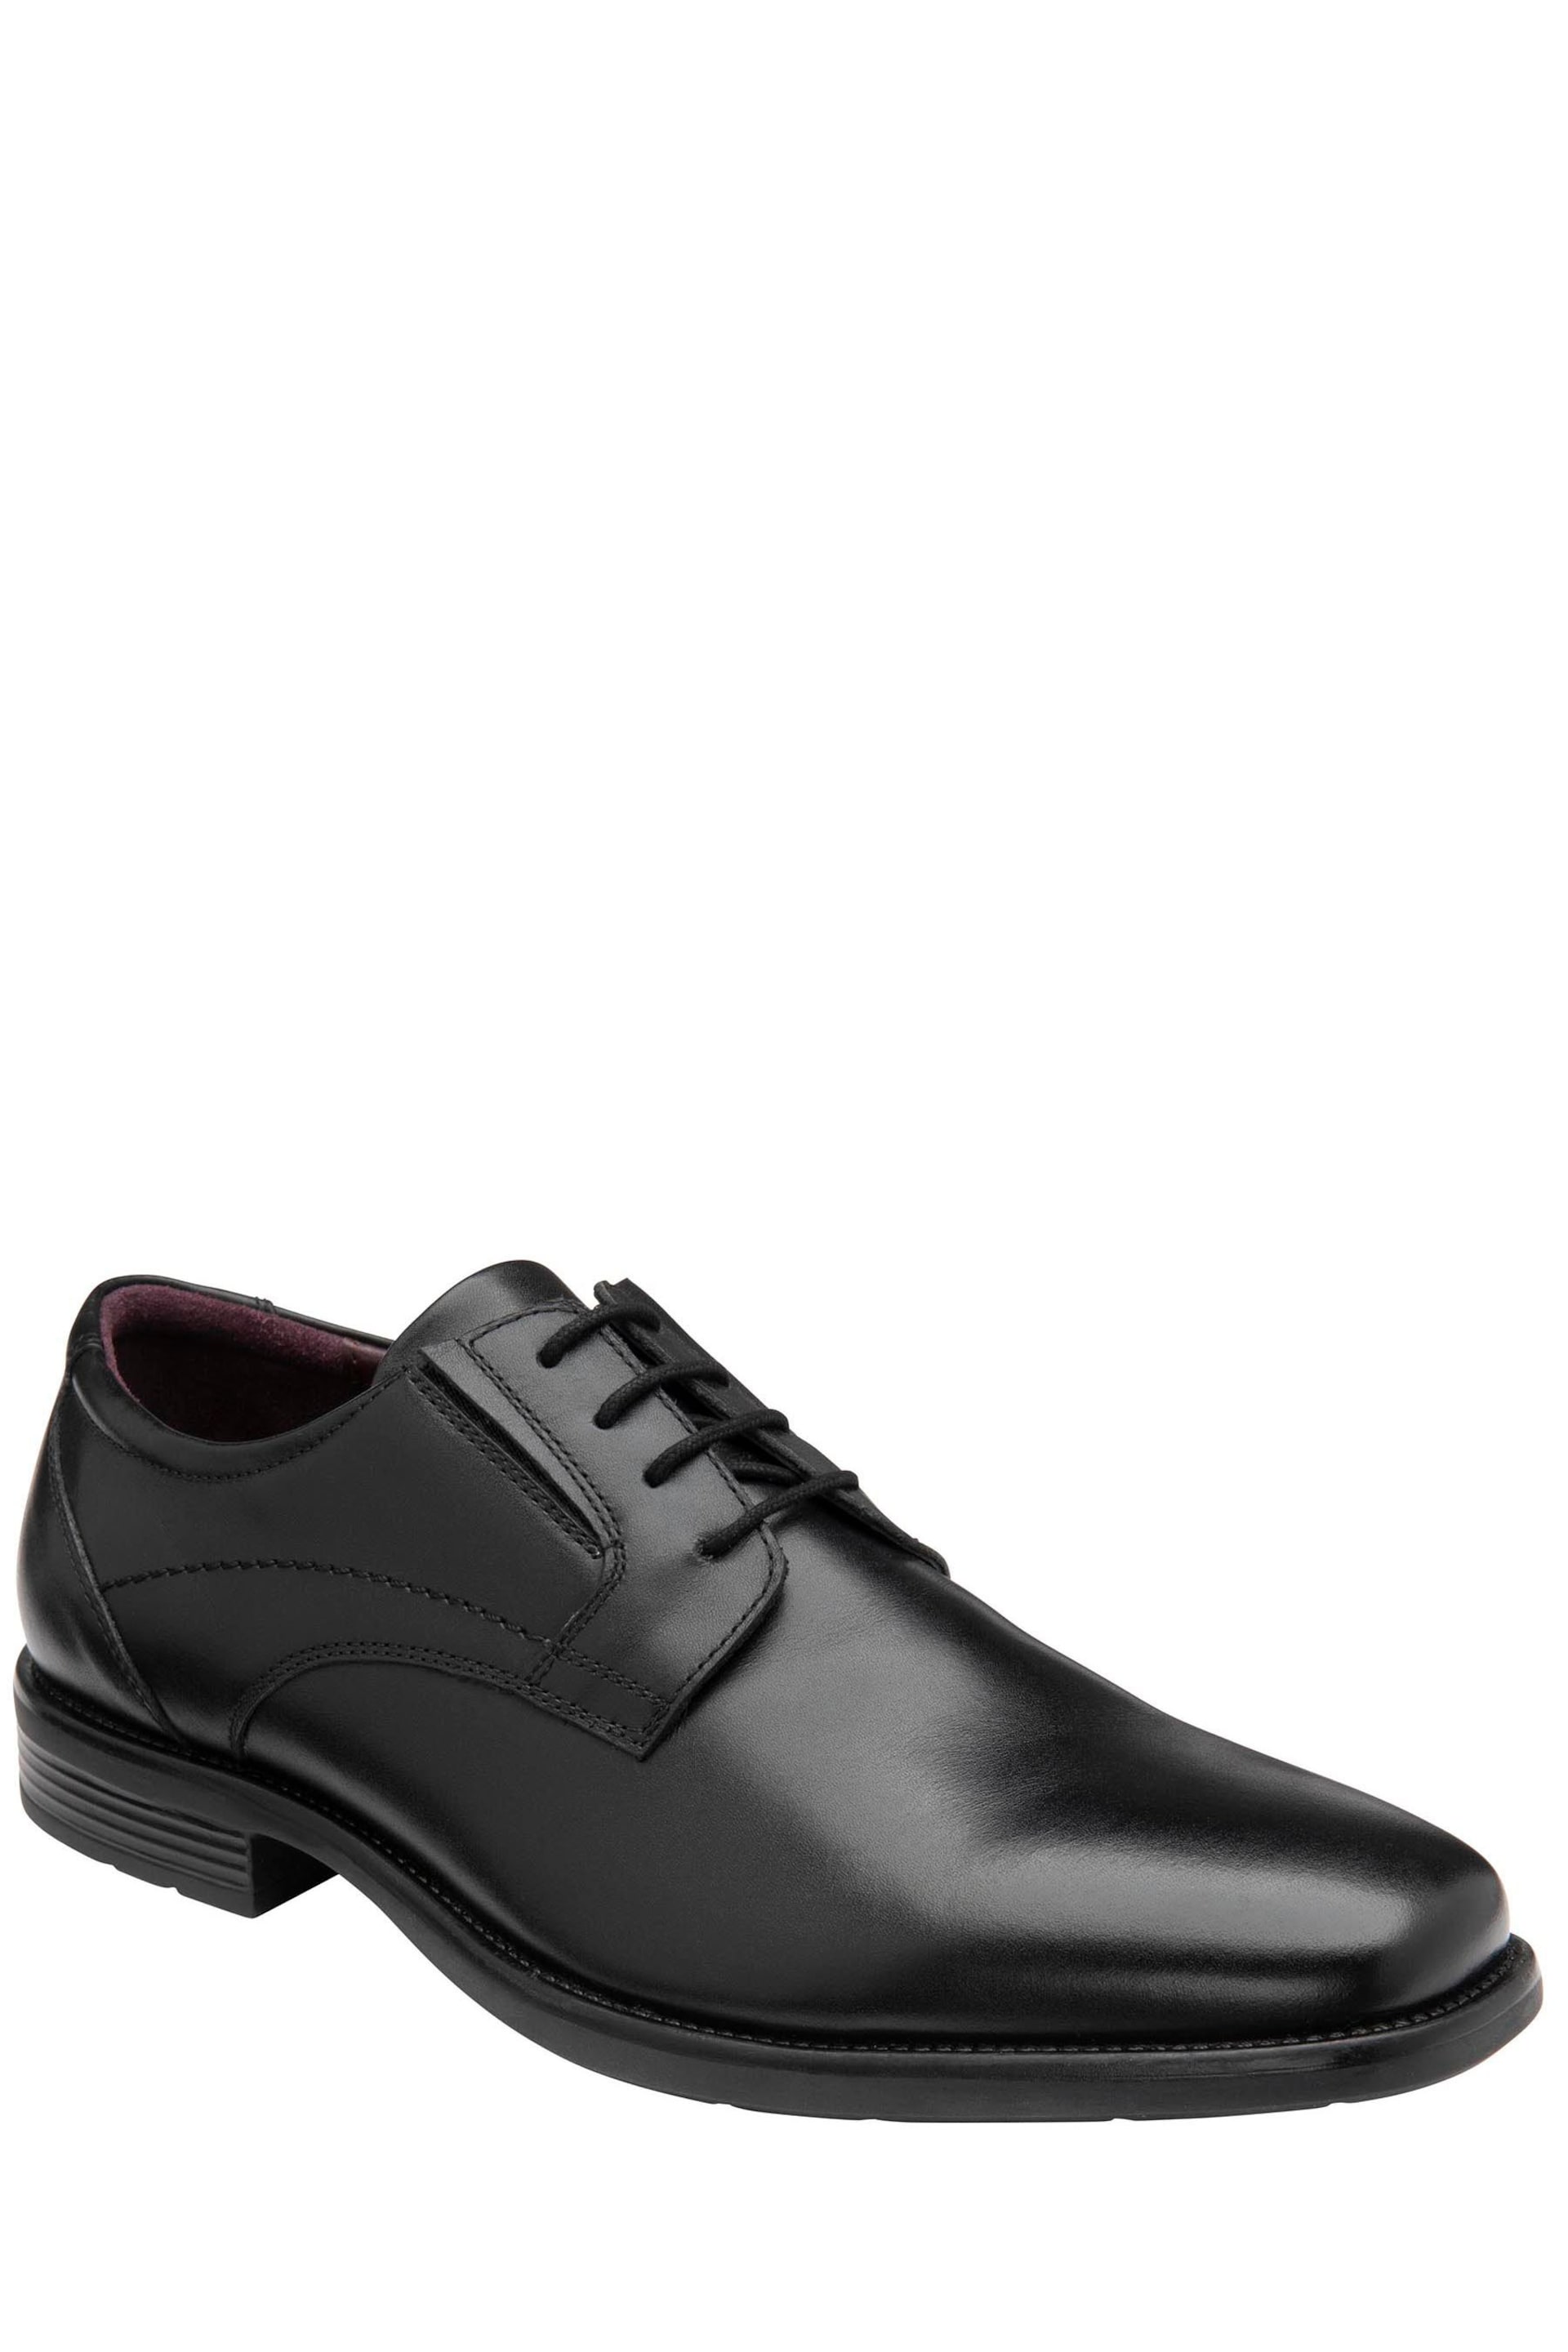 Lotus Black Leather Derby Shoes - Image 1 of 4